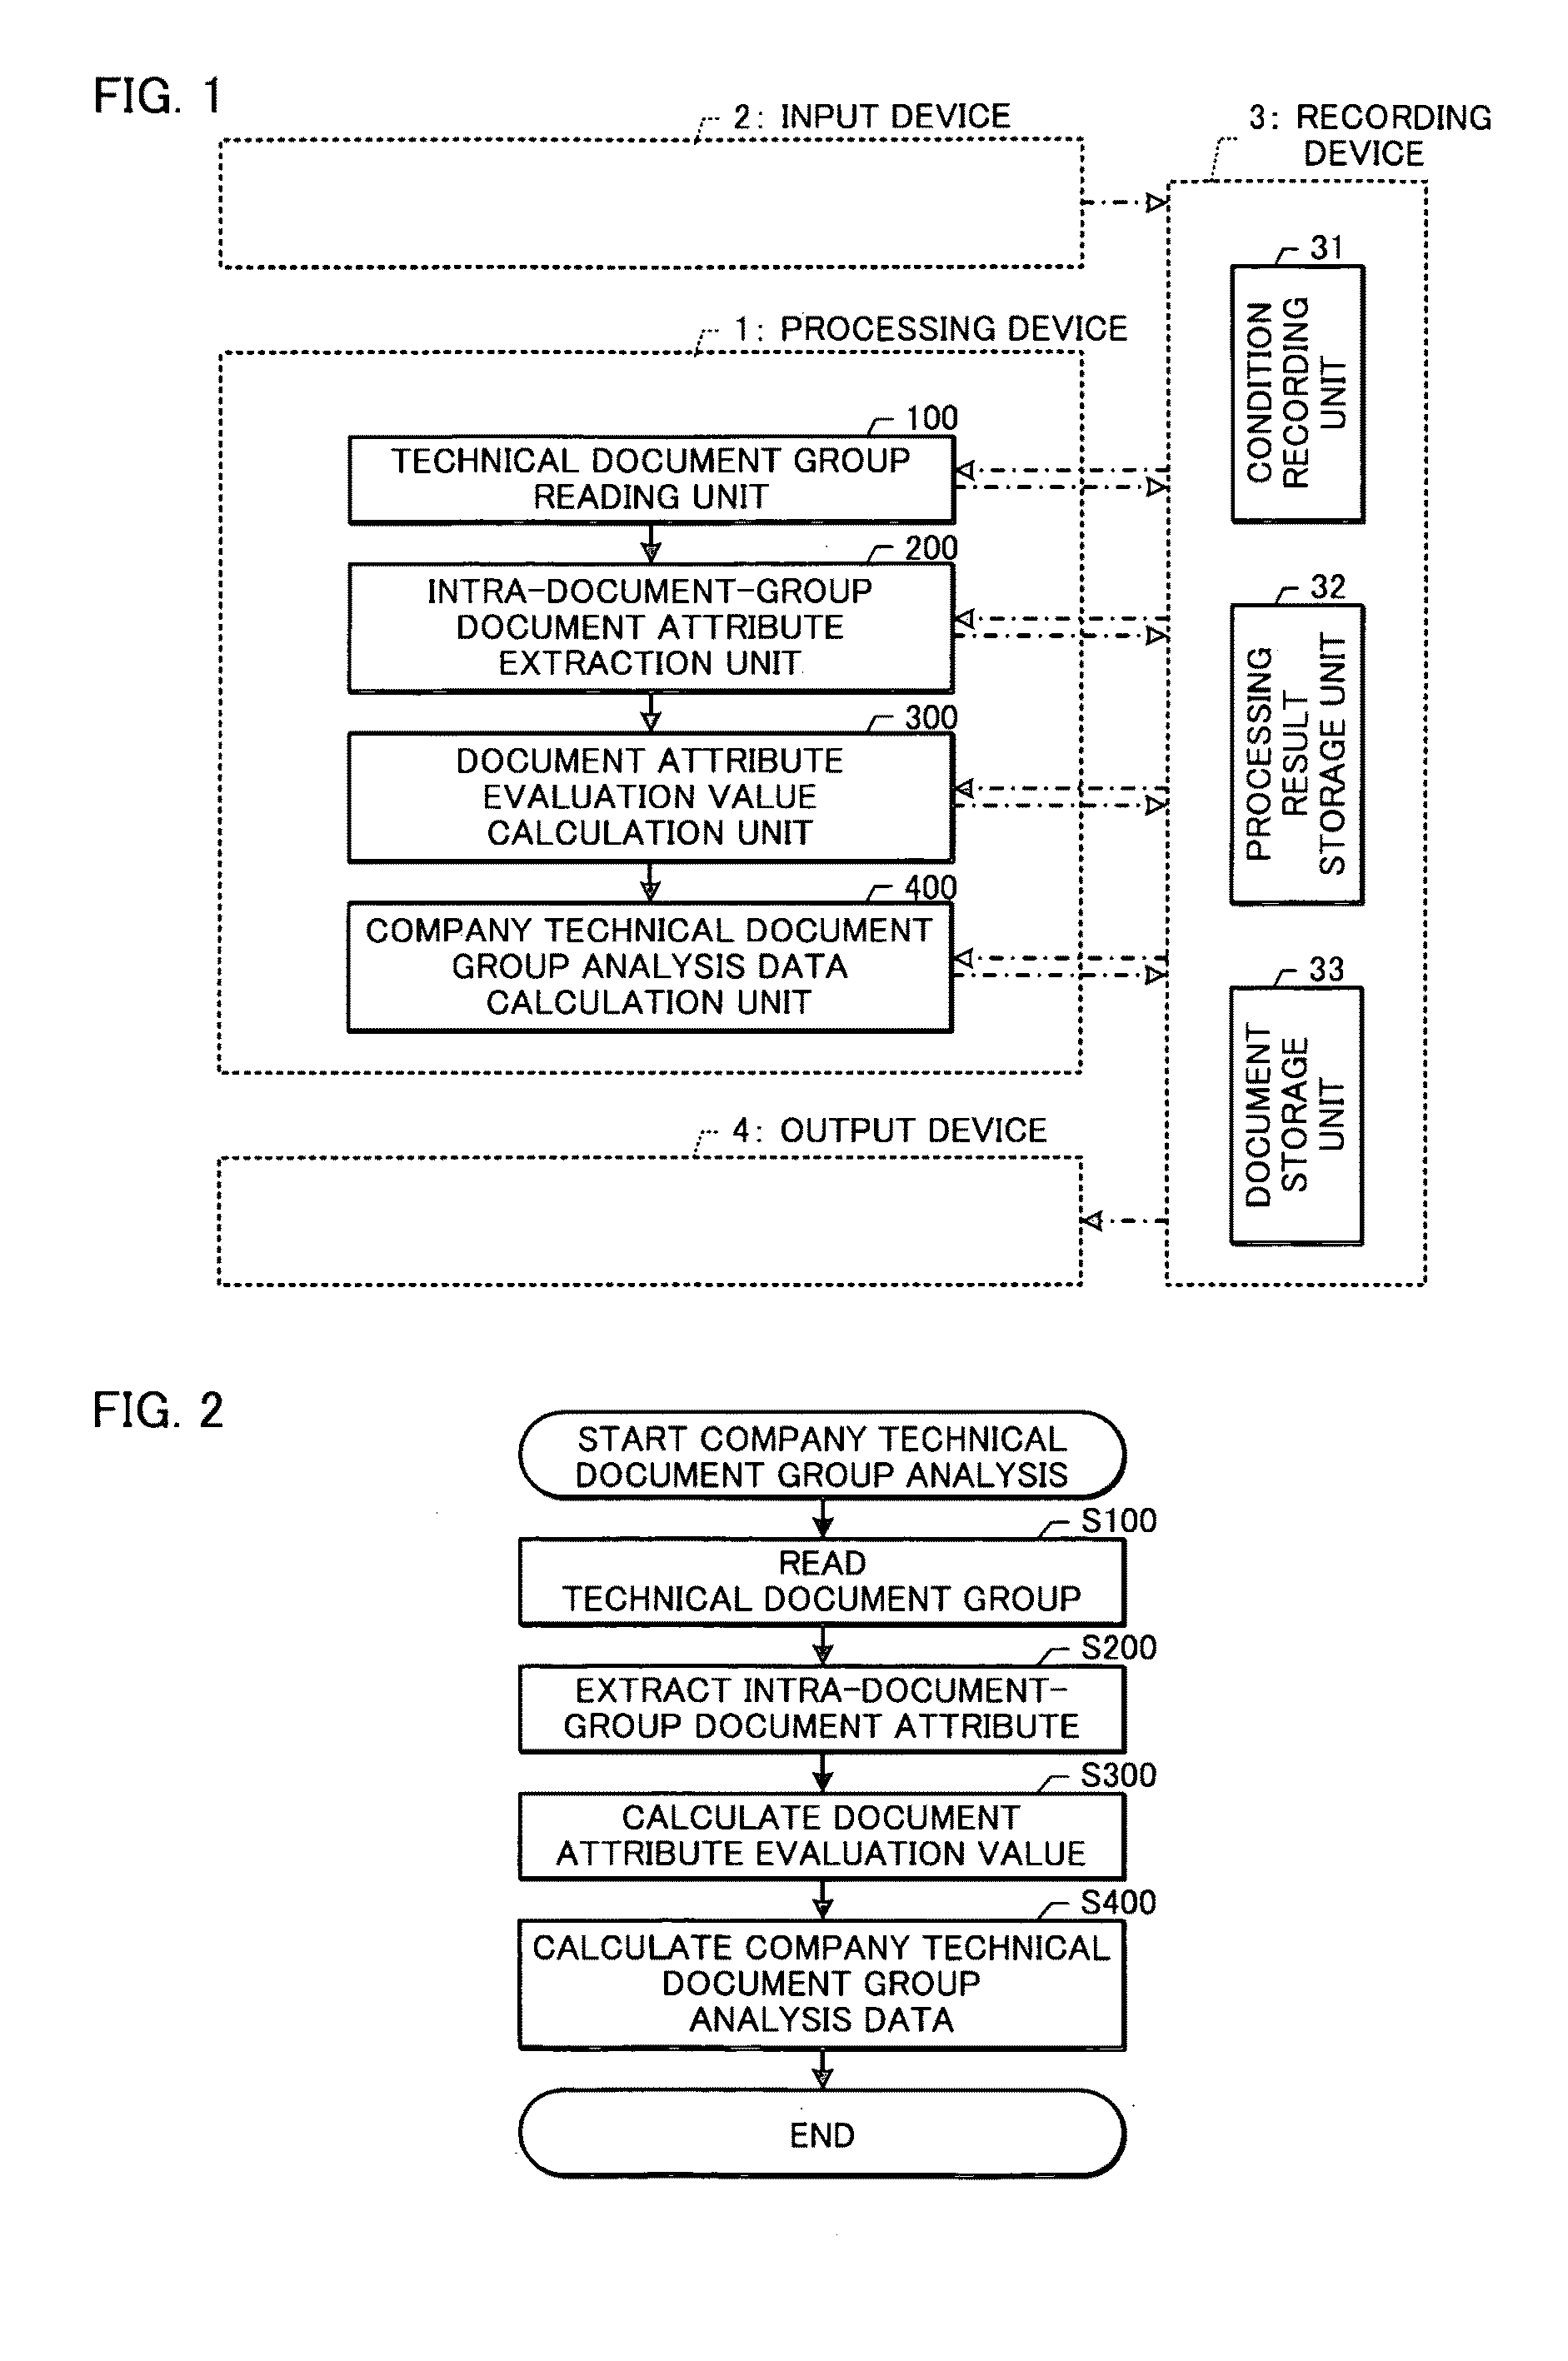 Company Technical Document Group Analysis Supporting Device